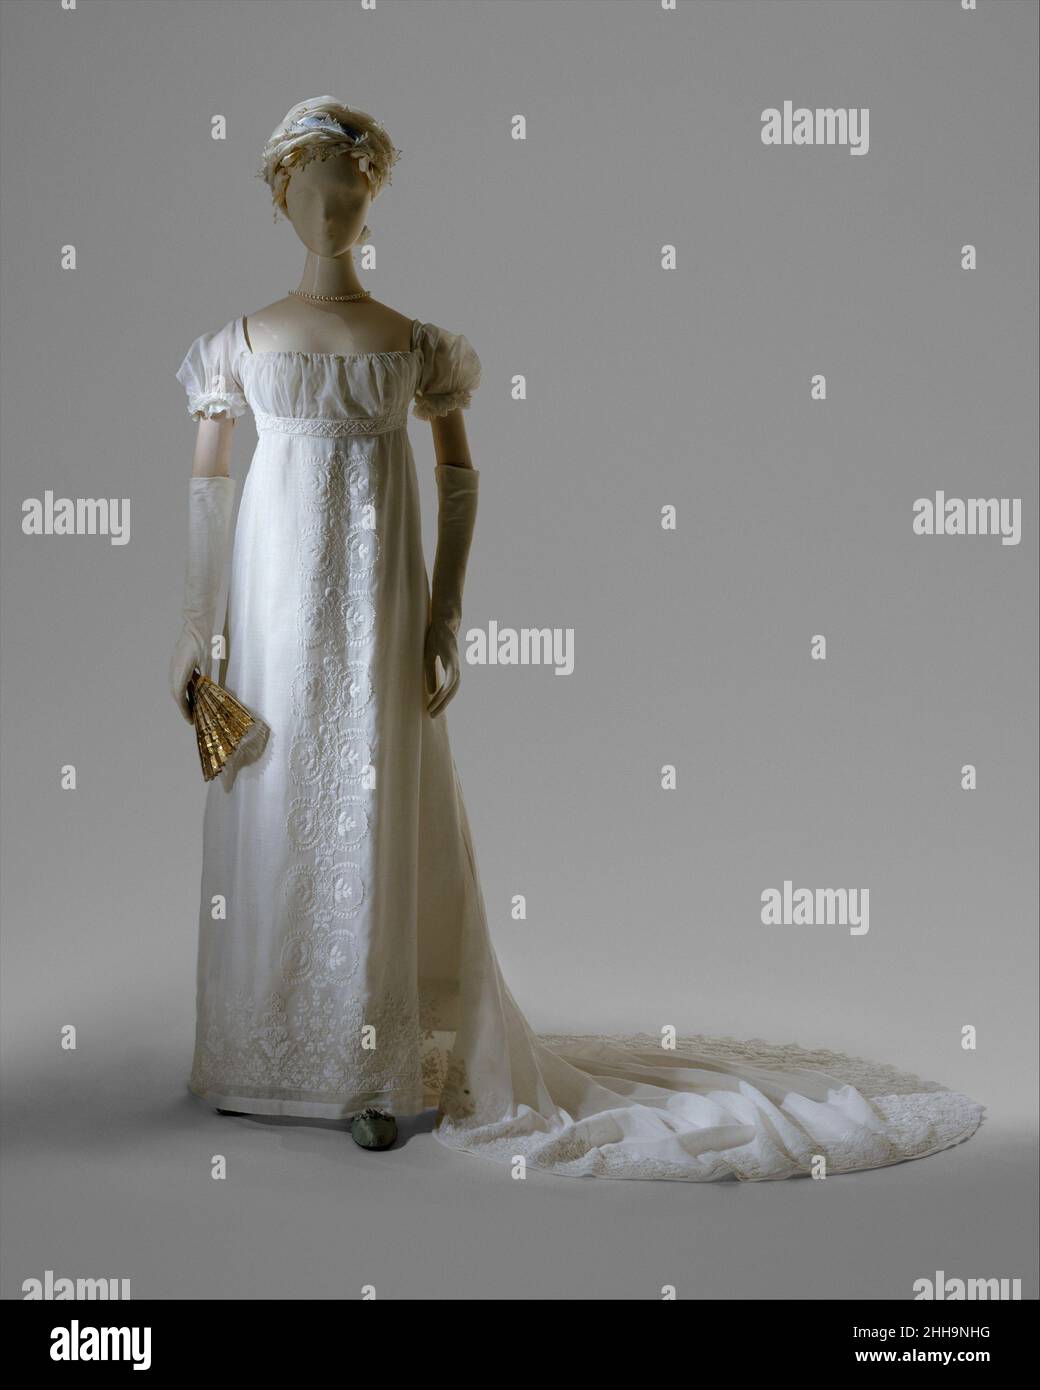 Evening dress 1804–5 French On December 24, 1803, Jerome Bonaparte (1784—1860), brother of Napoleon, wed Elizabeth Patterson (1785—1879) of Baltimore. The beautiful and fashionable young American was married in a dress of muslin and lace that, according to a contemporary, 'would fit easily into a gentleman's pocket.' This description evokes the sheer, narrow dresses that caused a sensation at the beginning of the nineteenth century, more because of their contrast with the elaborate hooped costumes of previous decades than for any real immodesty. Although originally thought to have been Patters Stock Photo